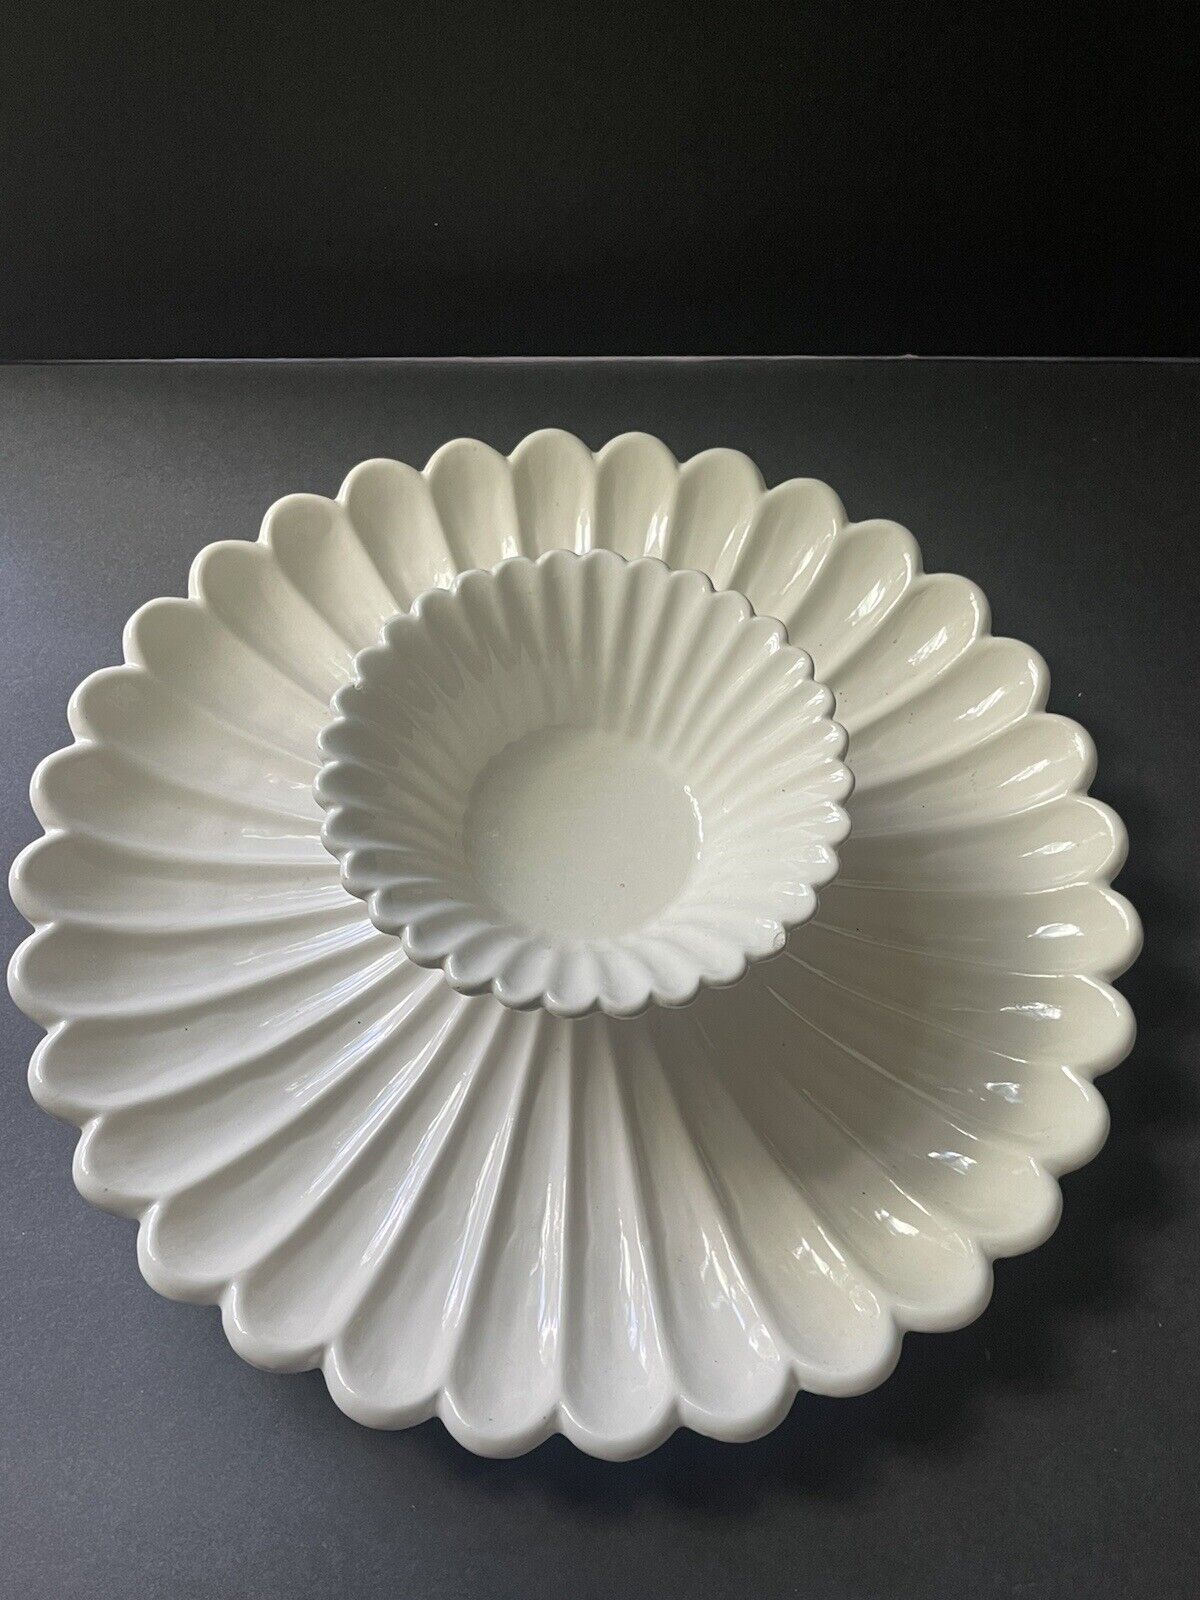 Vintage Fluted Charcuterie Serving Tray Chip Dip Retro White Ceramic (2) Piece